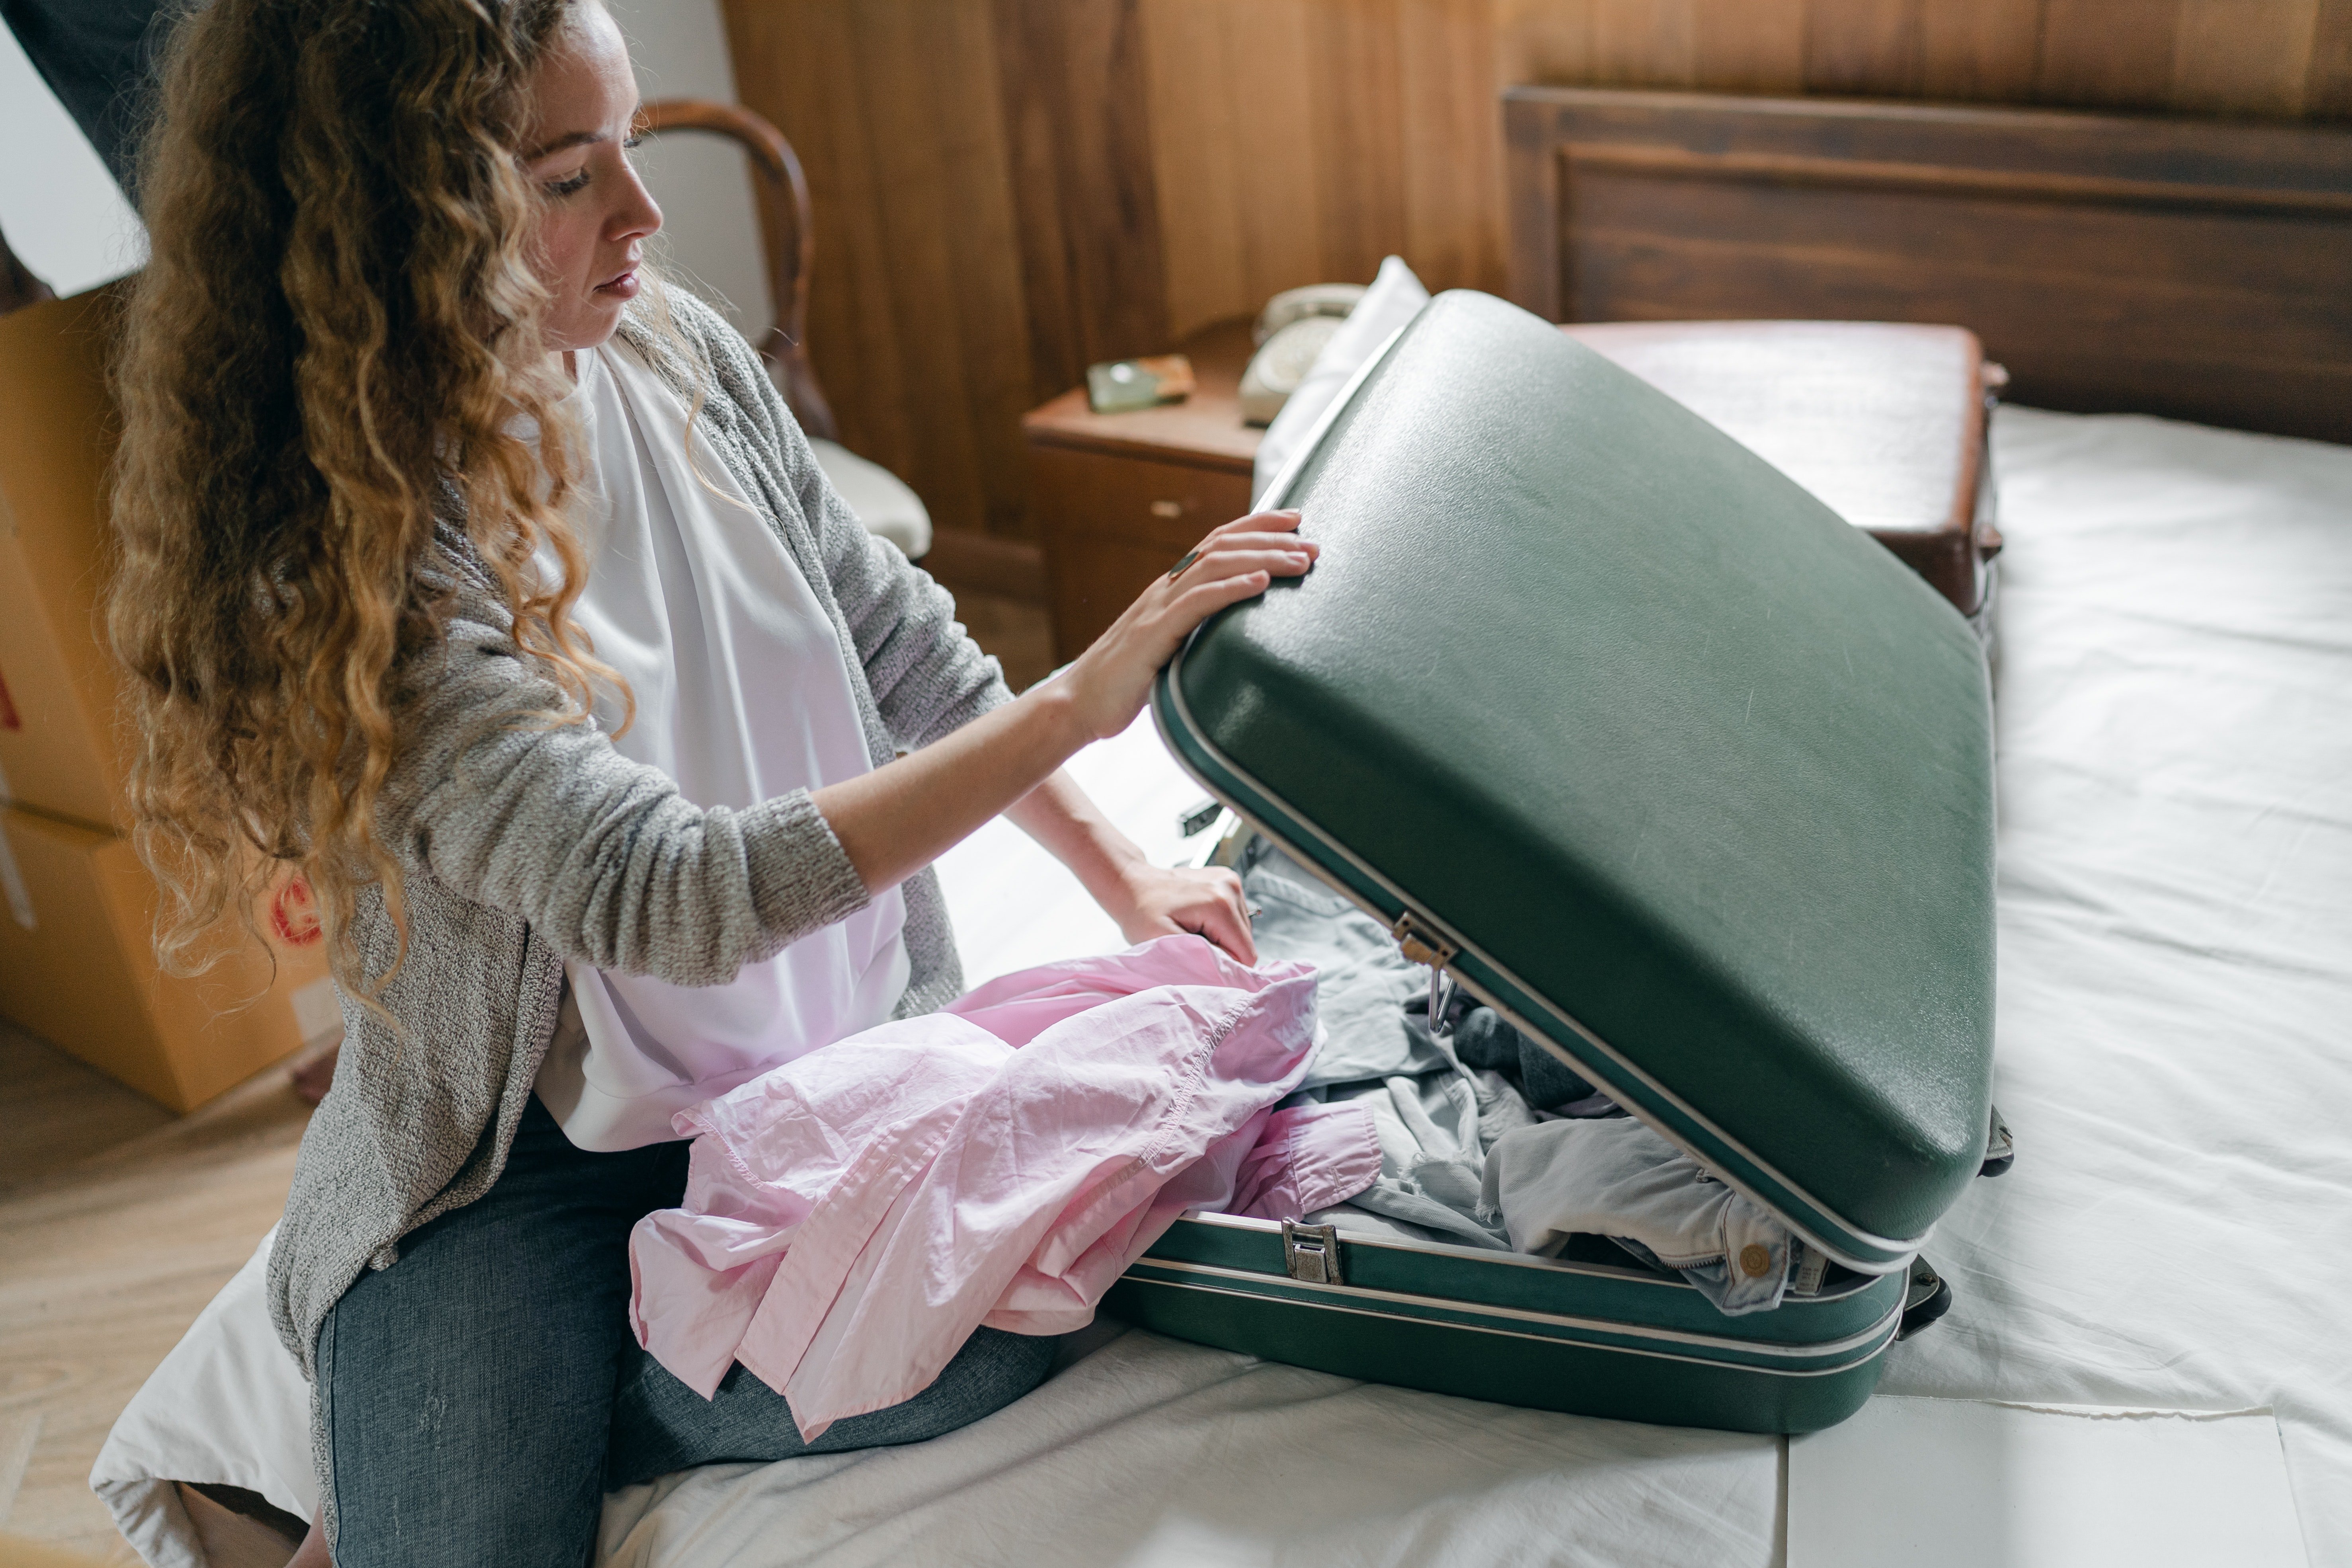 Barbara packed her bags and moved out of their home with her boys | Source: Pexels